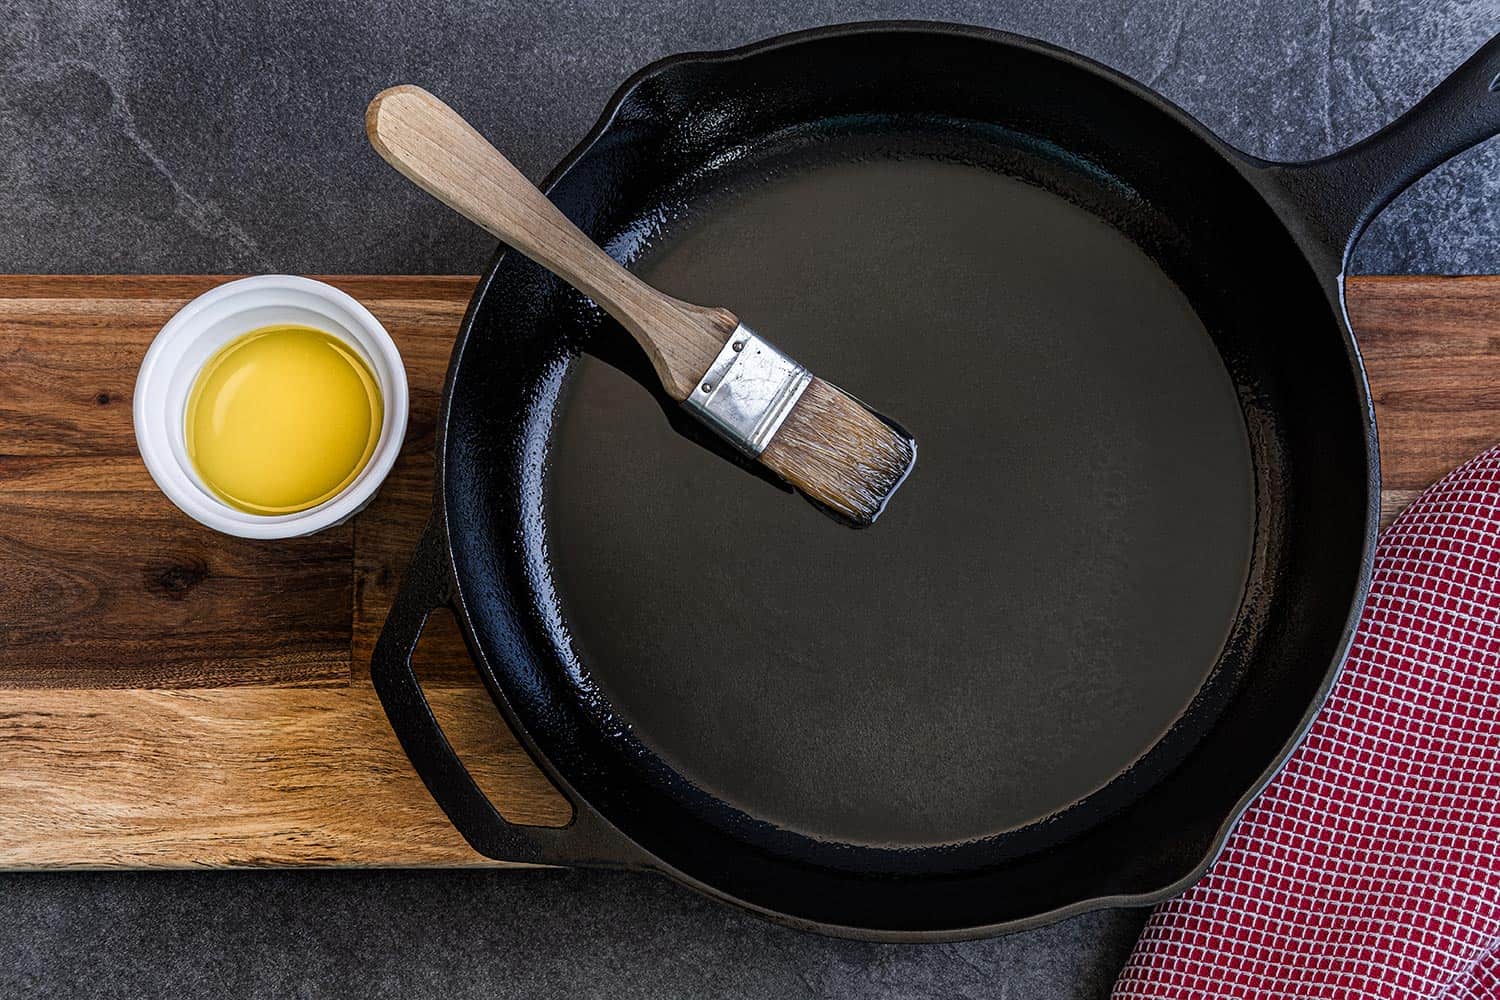 Cast iron skillet being brushed with olive oil to prevent sticking